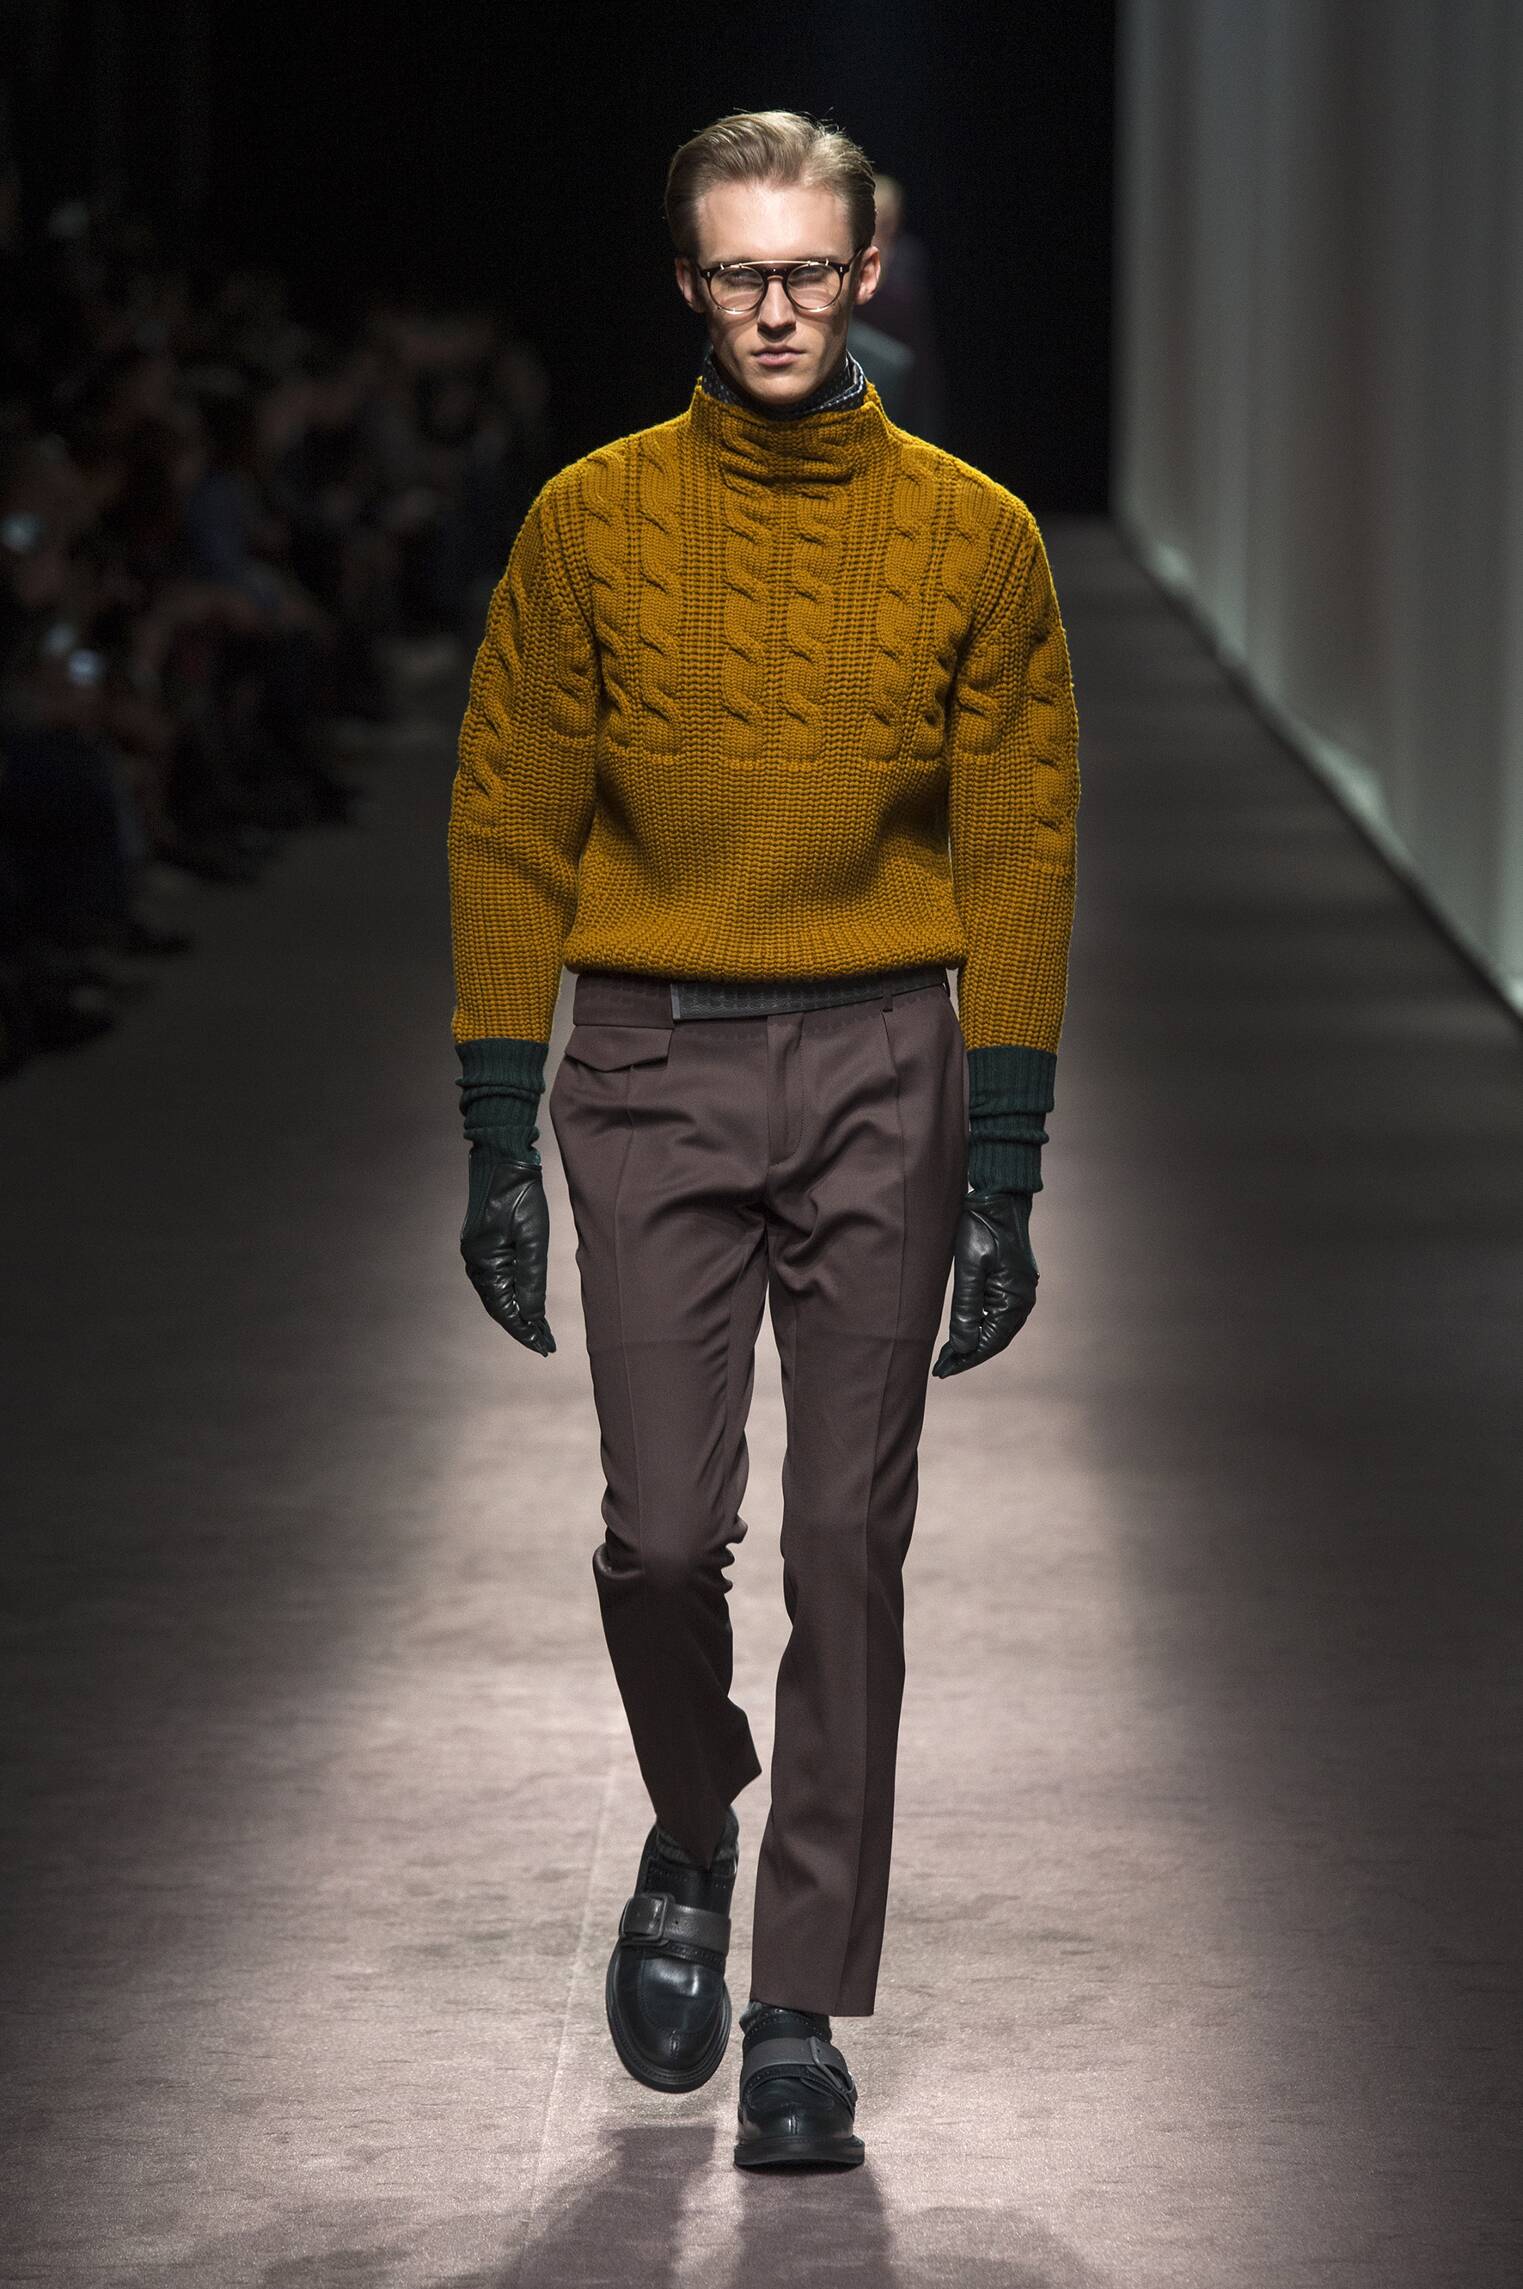 Canali's 2016 Fall/Winter Collection Revealed | The Extravagant